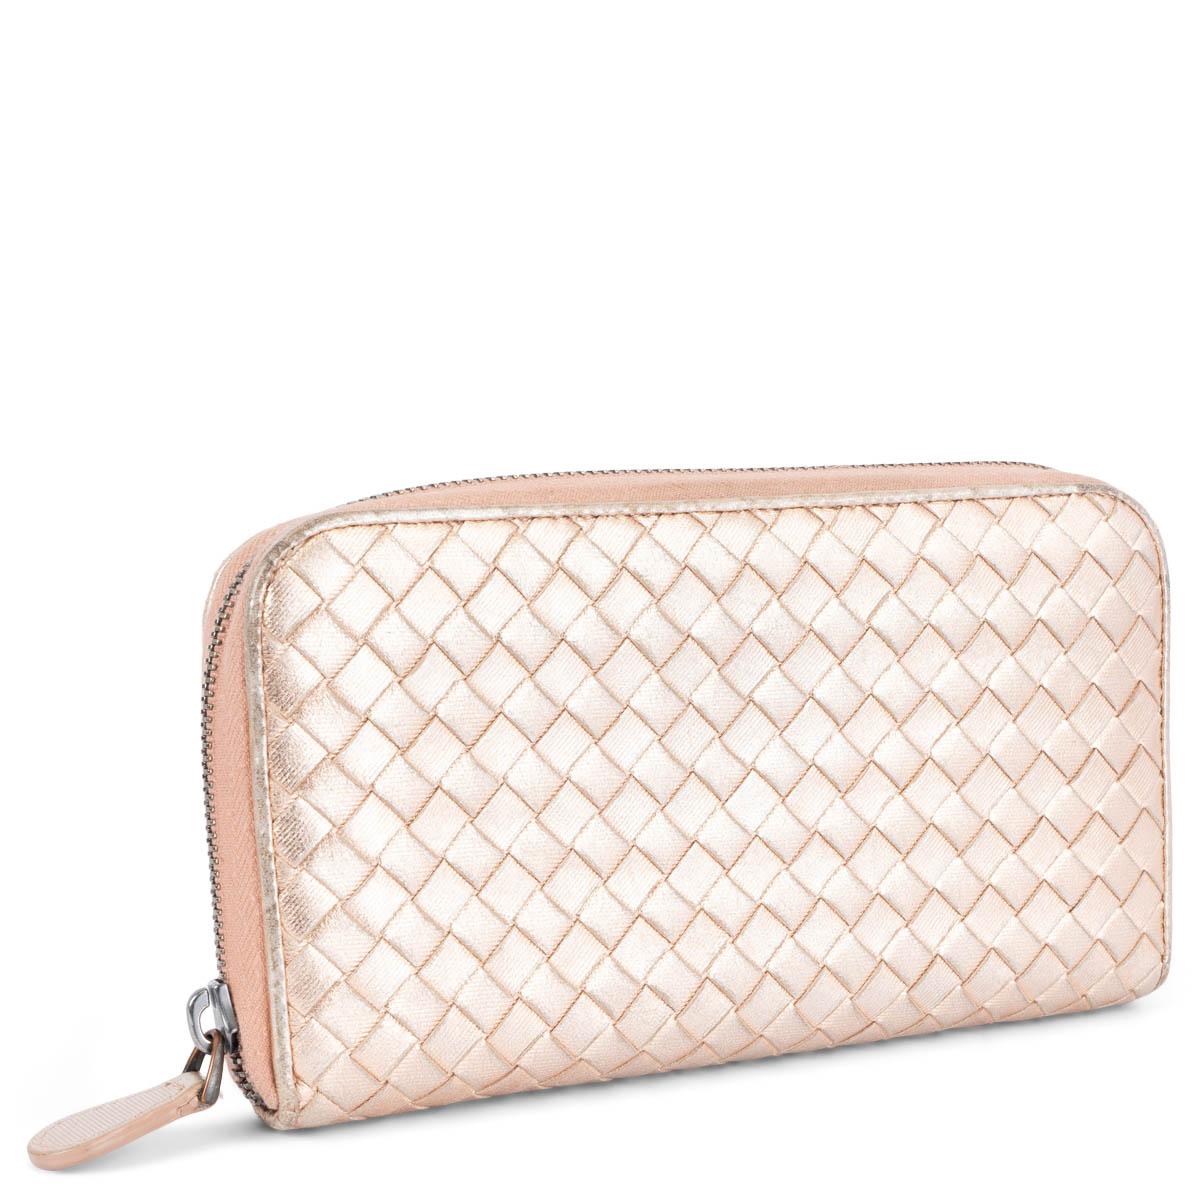 100% authentic Bottega Veneta Intrecciato zipper wallet metallic nude calfskin. Opens with a zipper to a nude and brown leather interior with eight credit card slots, two bill compartments, two extra compartments on the back and a zipped coin pocket